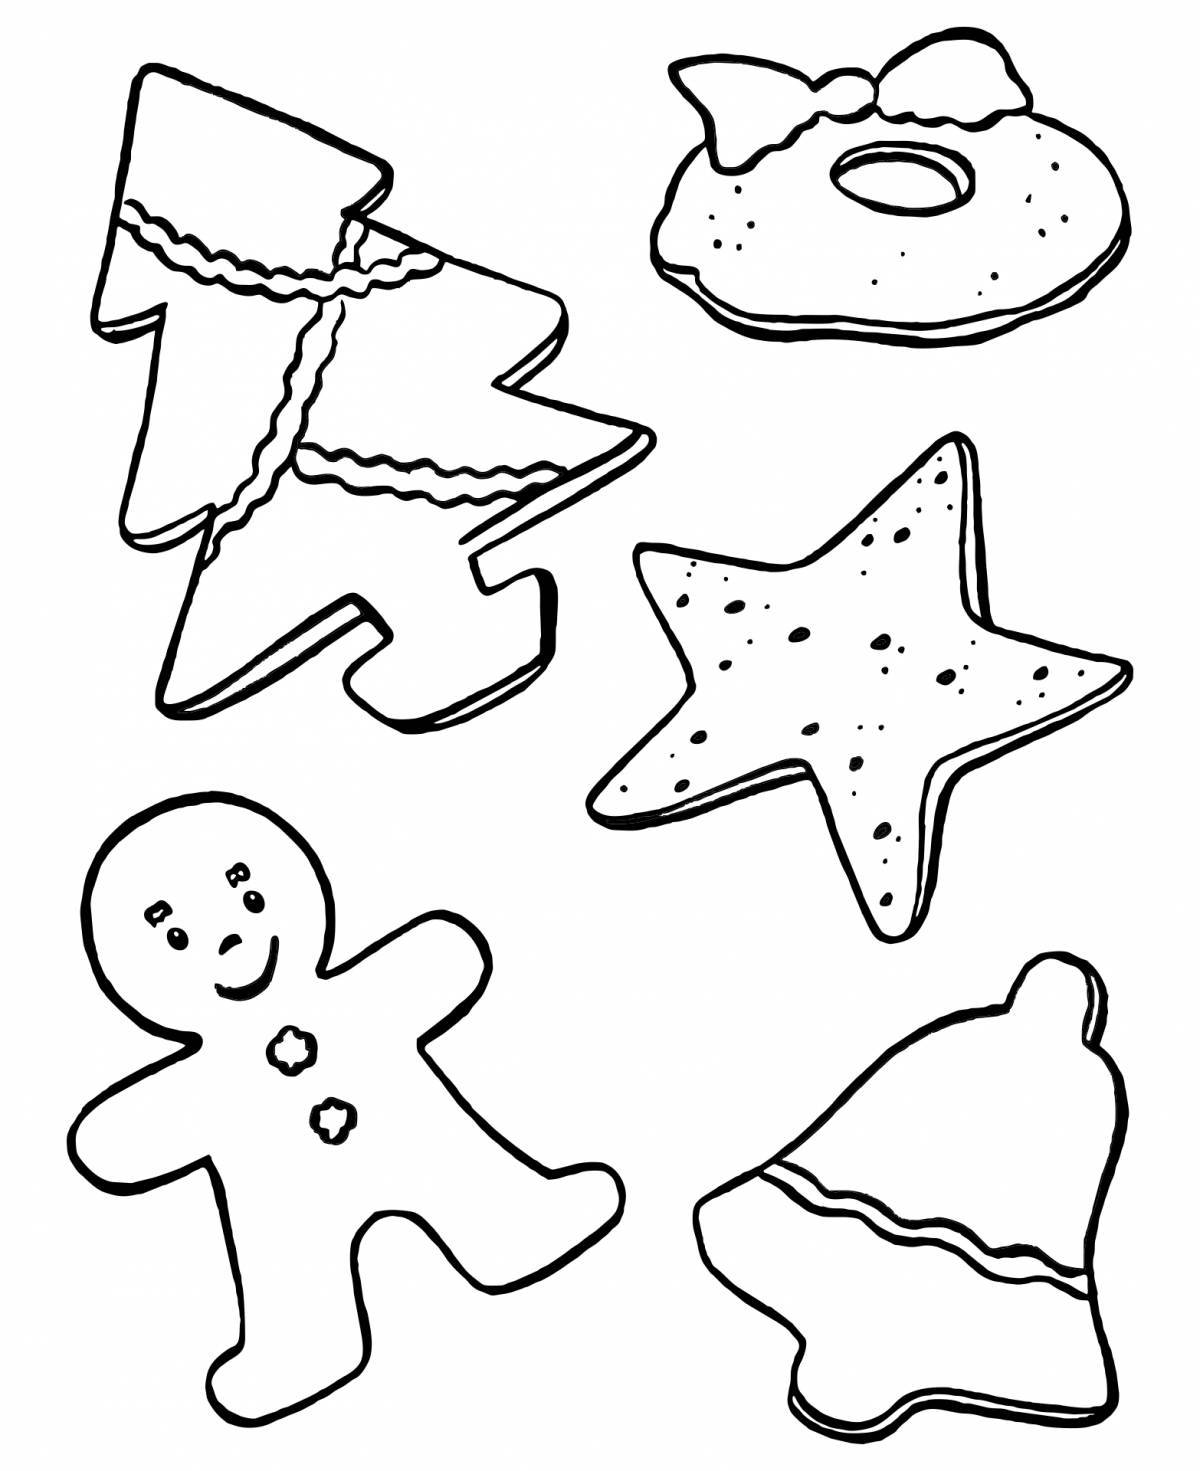 Cookie Inspirational Coloring Page